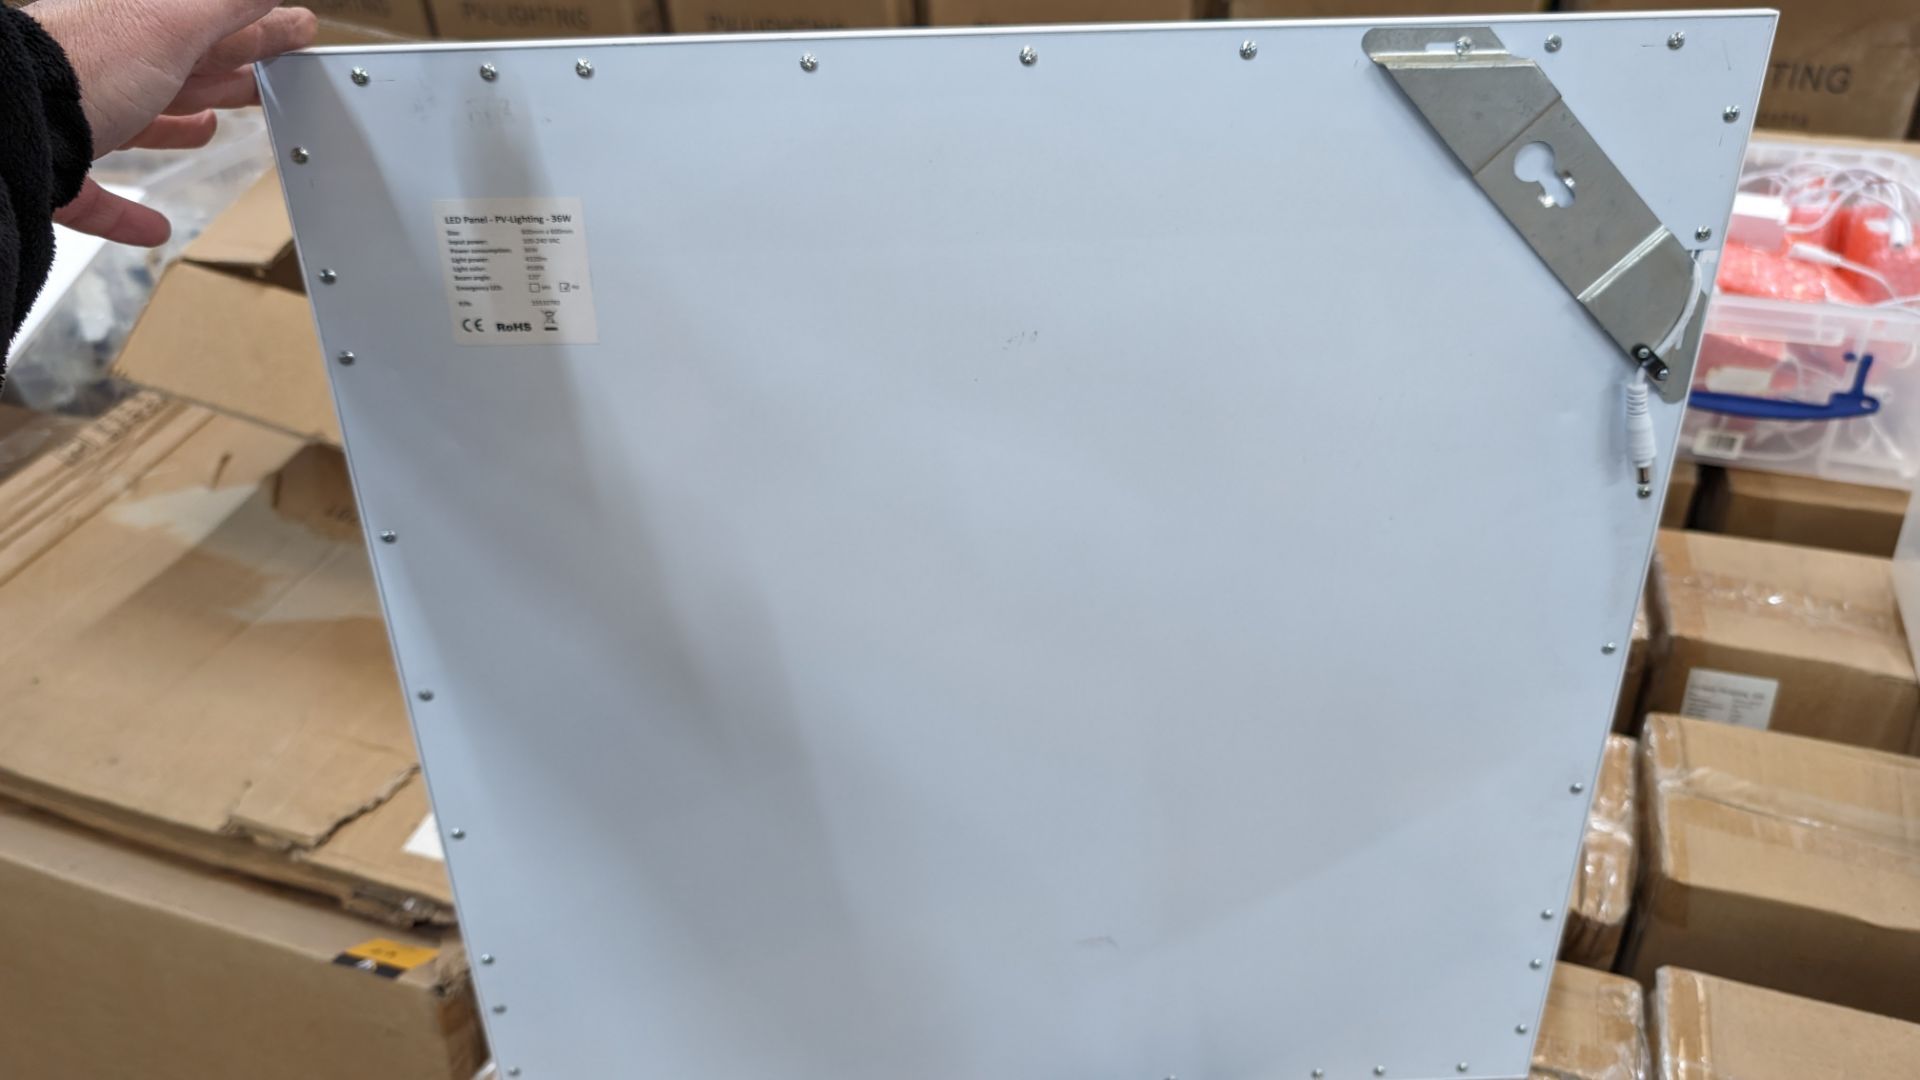 16 off 600mm x 600mm 36w 6000k 4320 lumens cold white LED lighting panels. 36w drivers. This lot c - Image 10 of 16